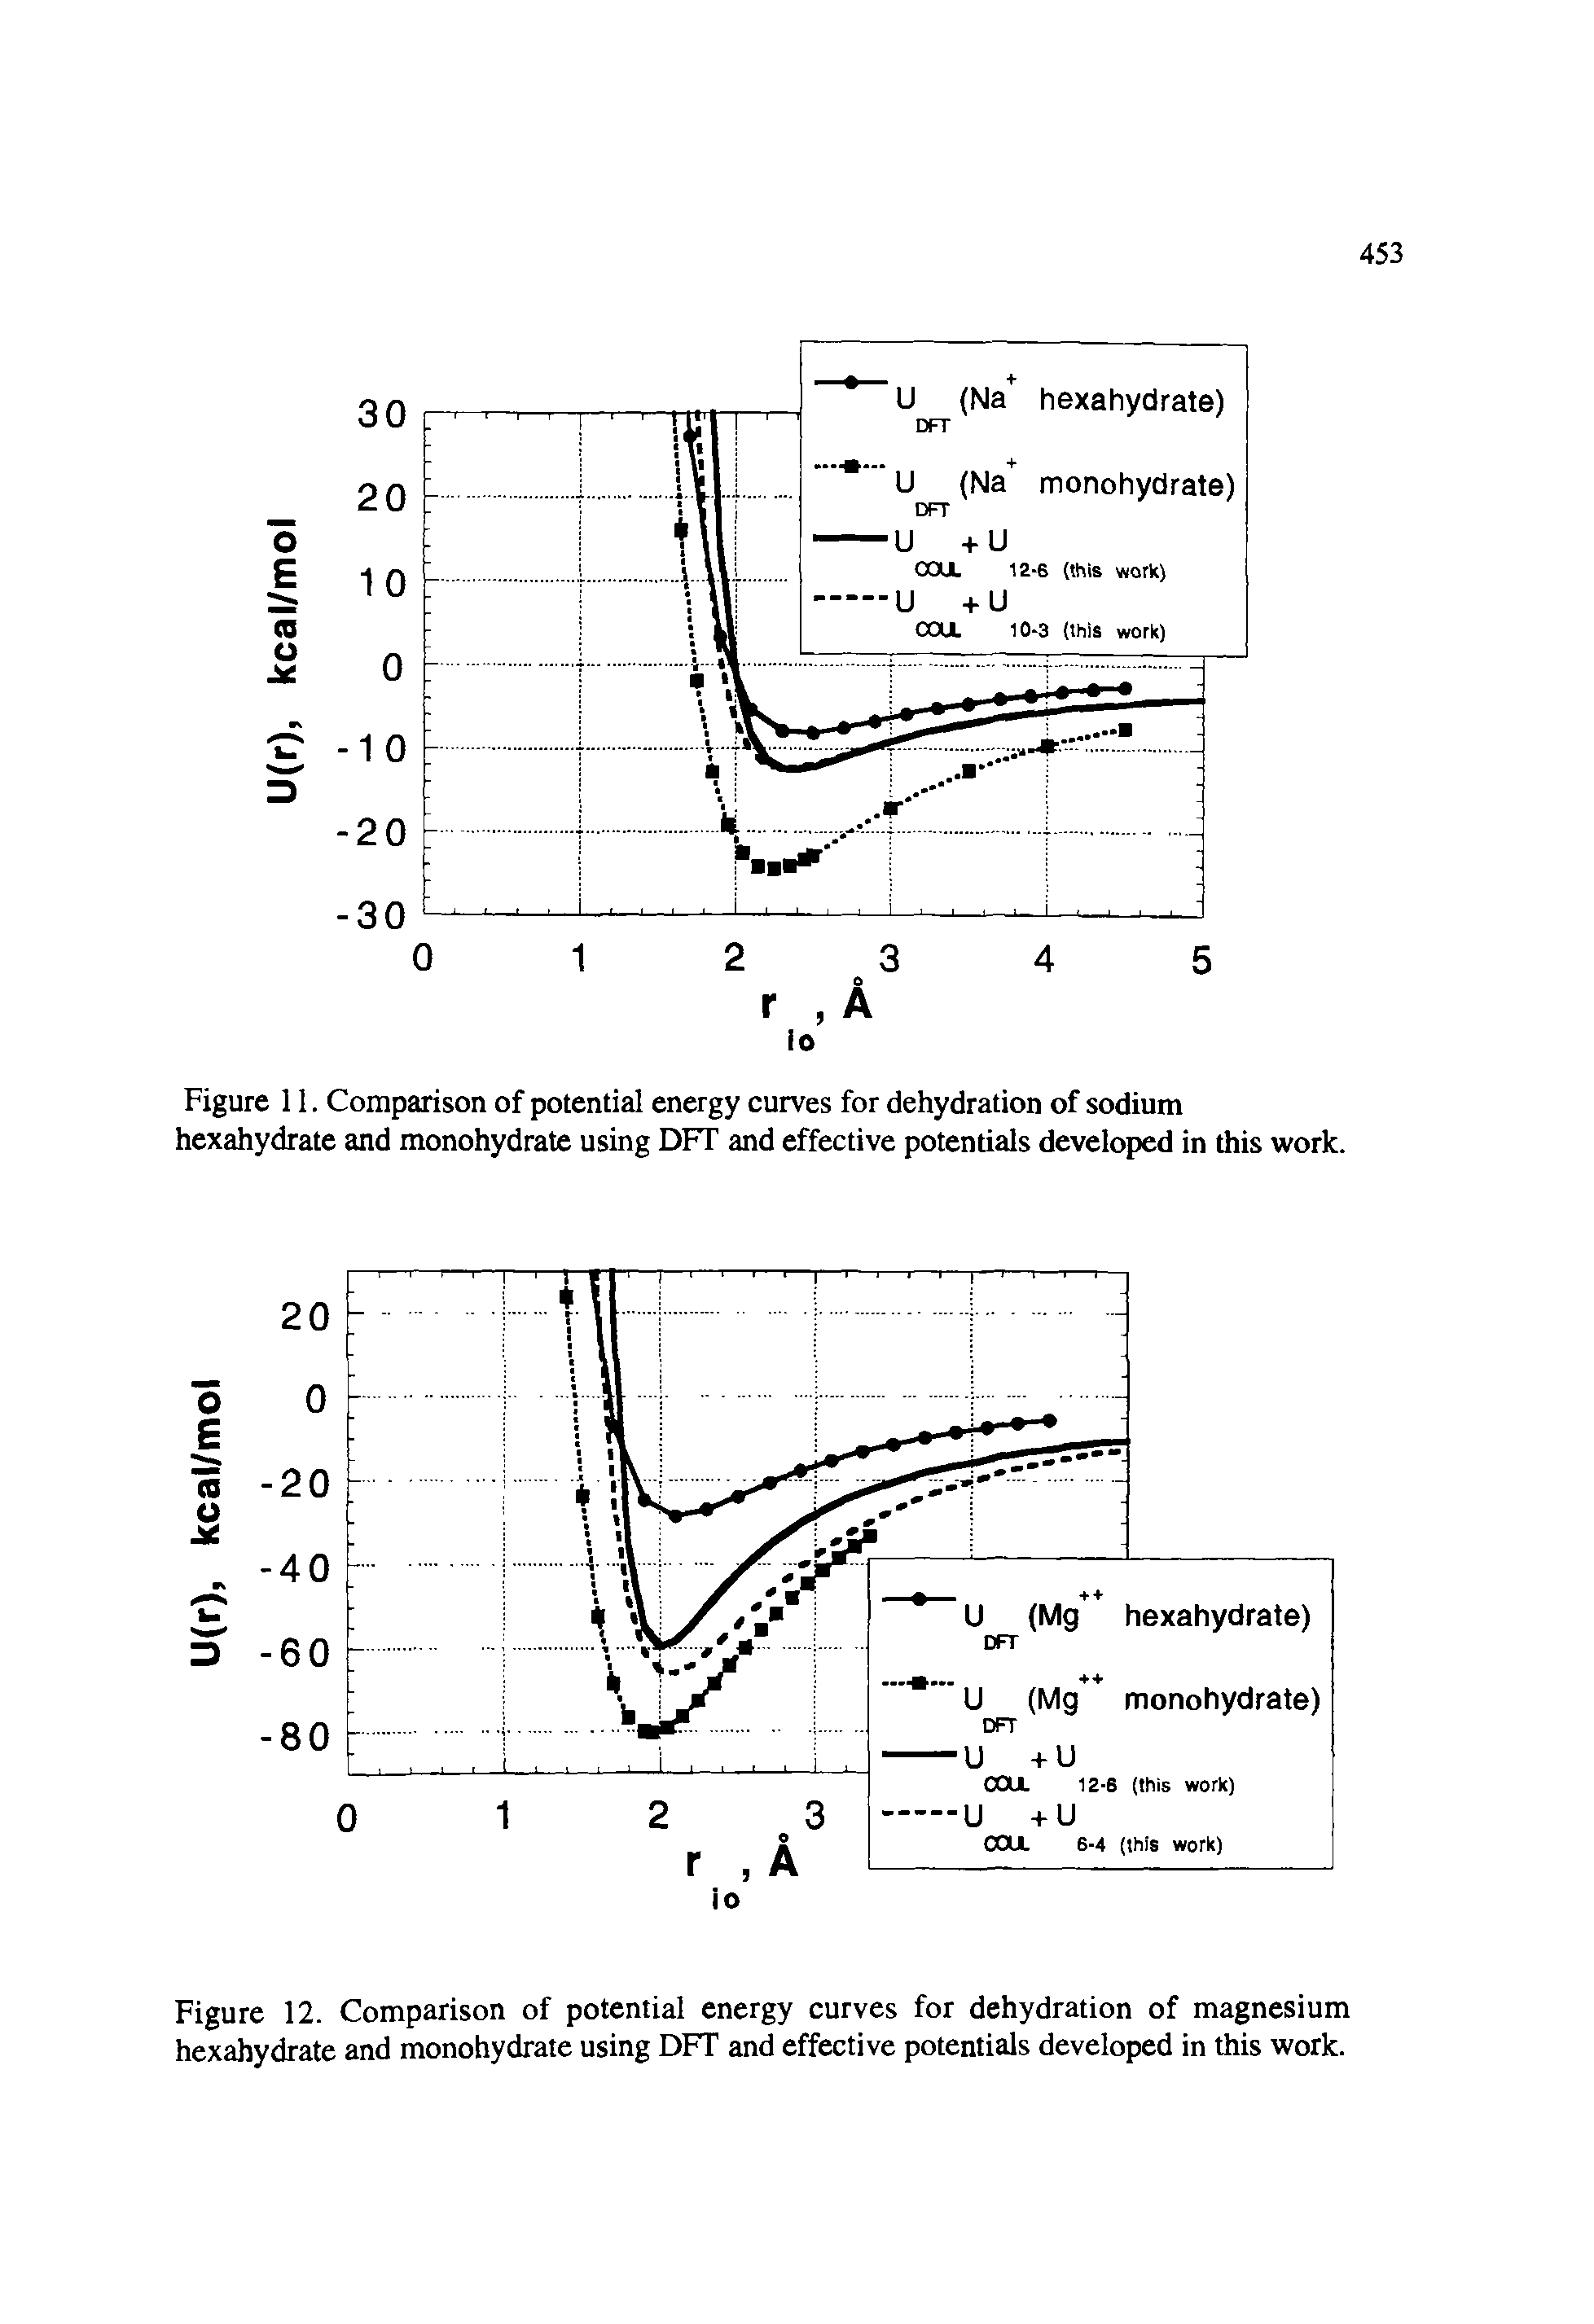 Figure 11. Comparison of potential energy curves for dehydration of sodium hexahydrate and monohydrate using DFT and effective potentials developed in this work.